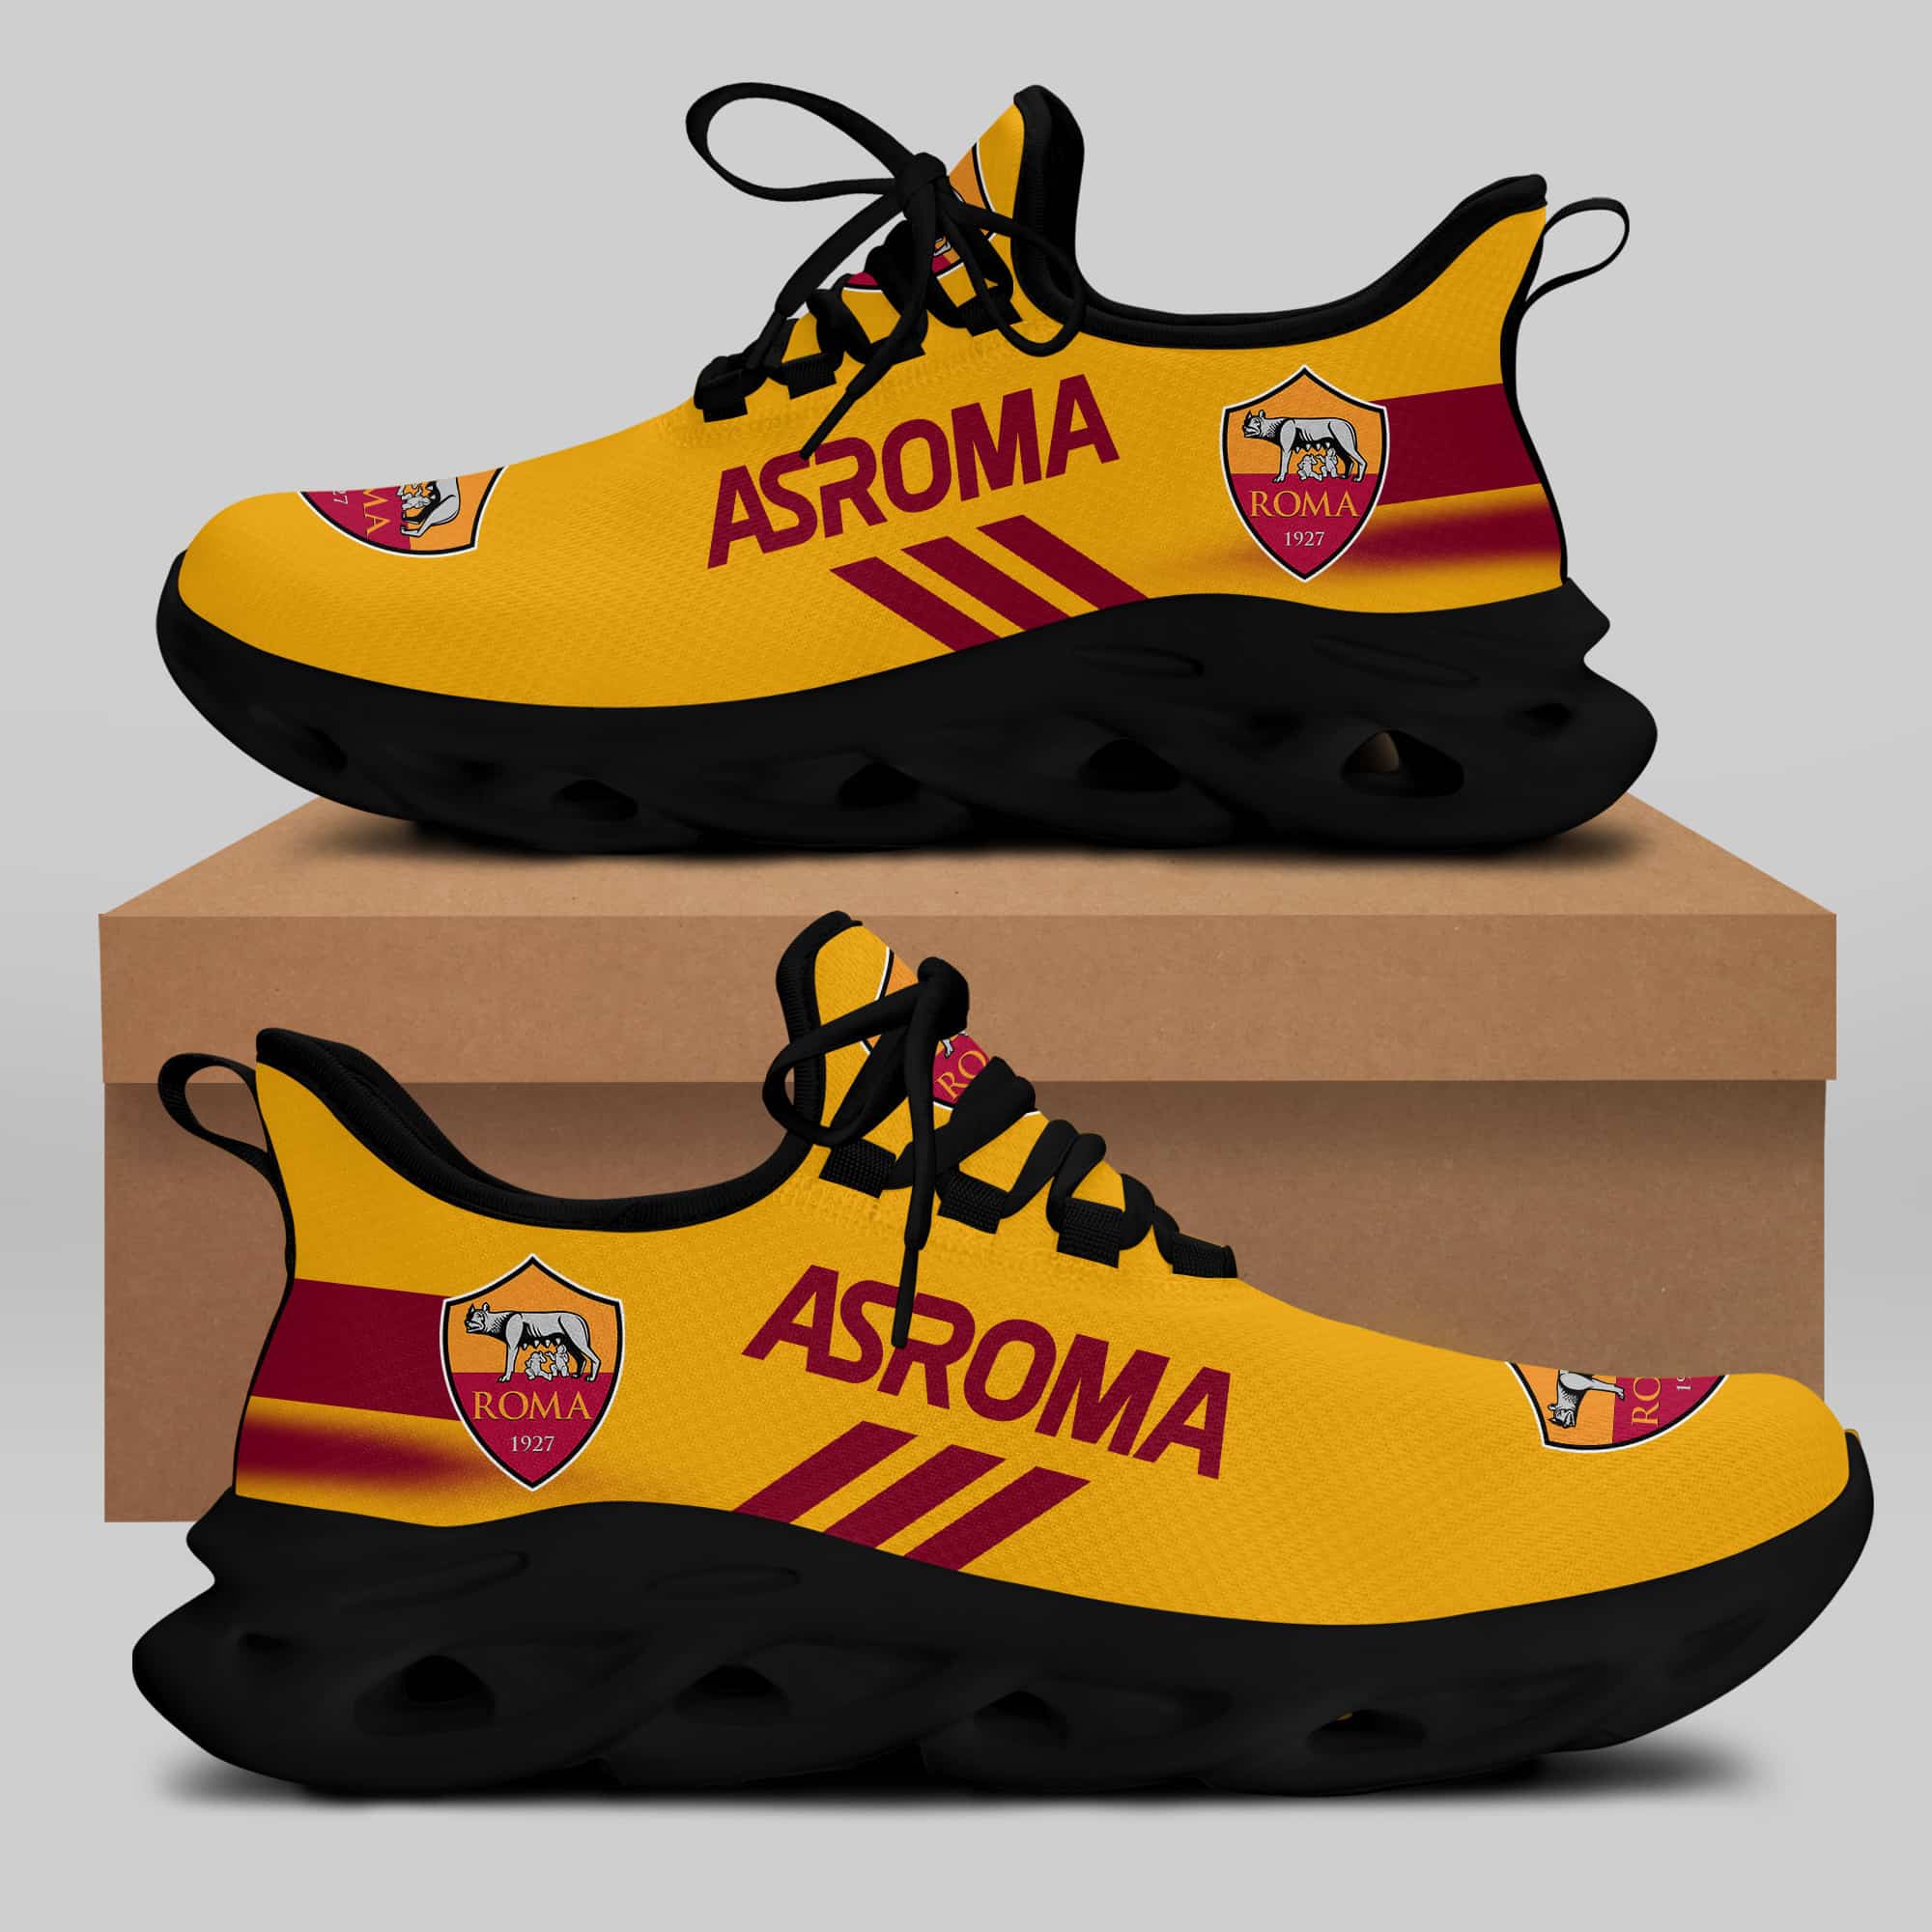 As Roma Running Shoes Max Soul Shoes Sneakers Ver 13 1